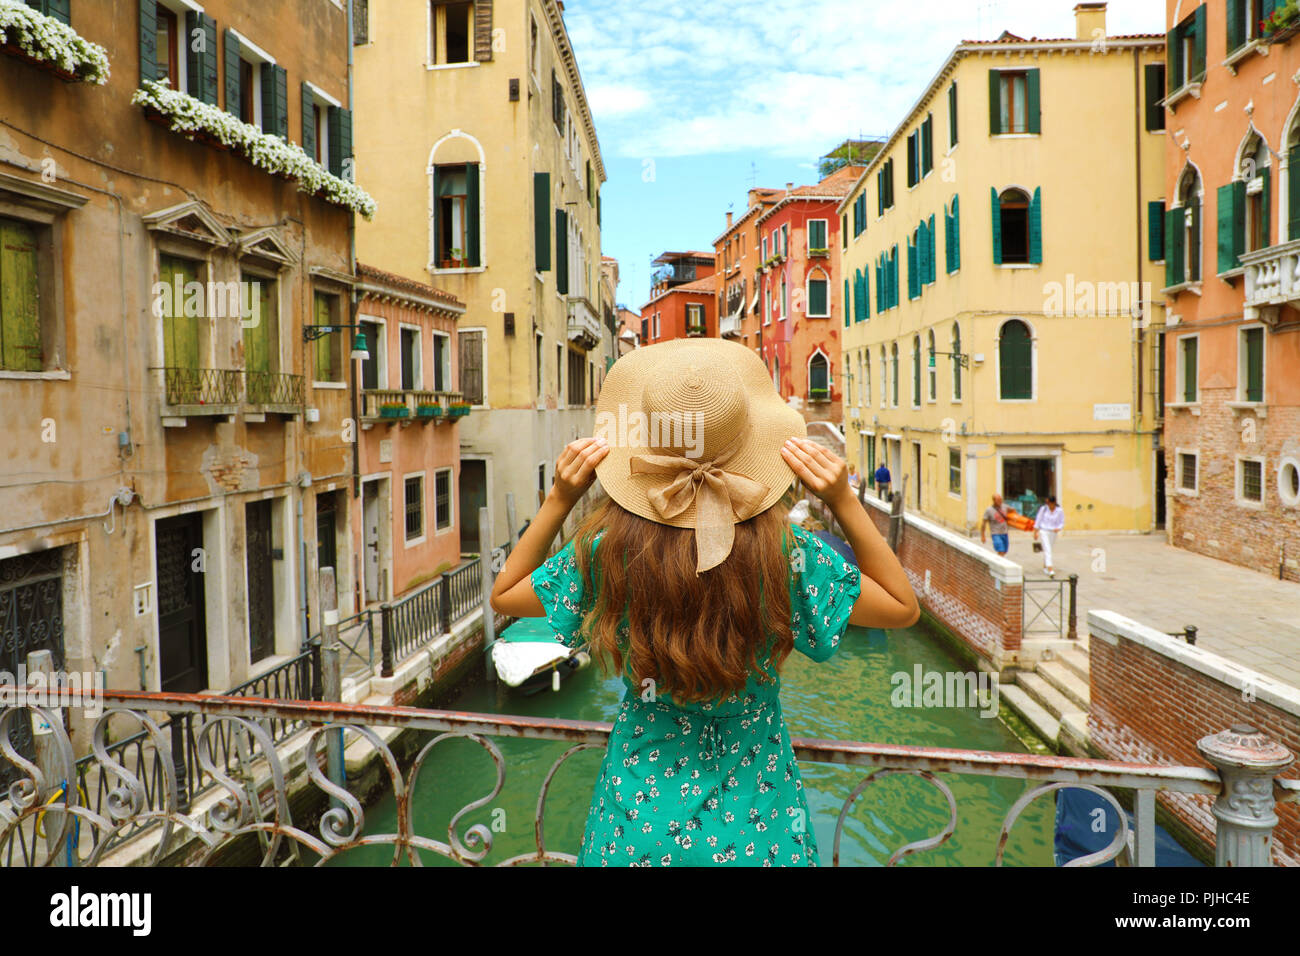 Sweet romantic girl charmed by Venice landscape. Rear view of female tourist on a bridge in Venice, Italy. Stock Photo